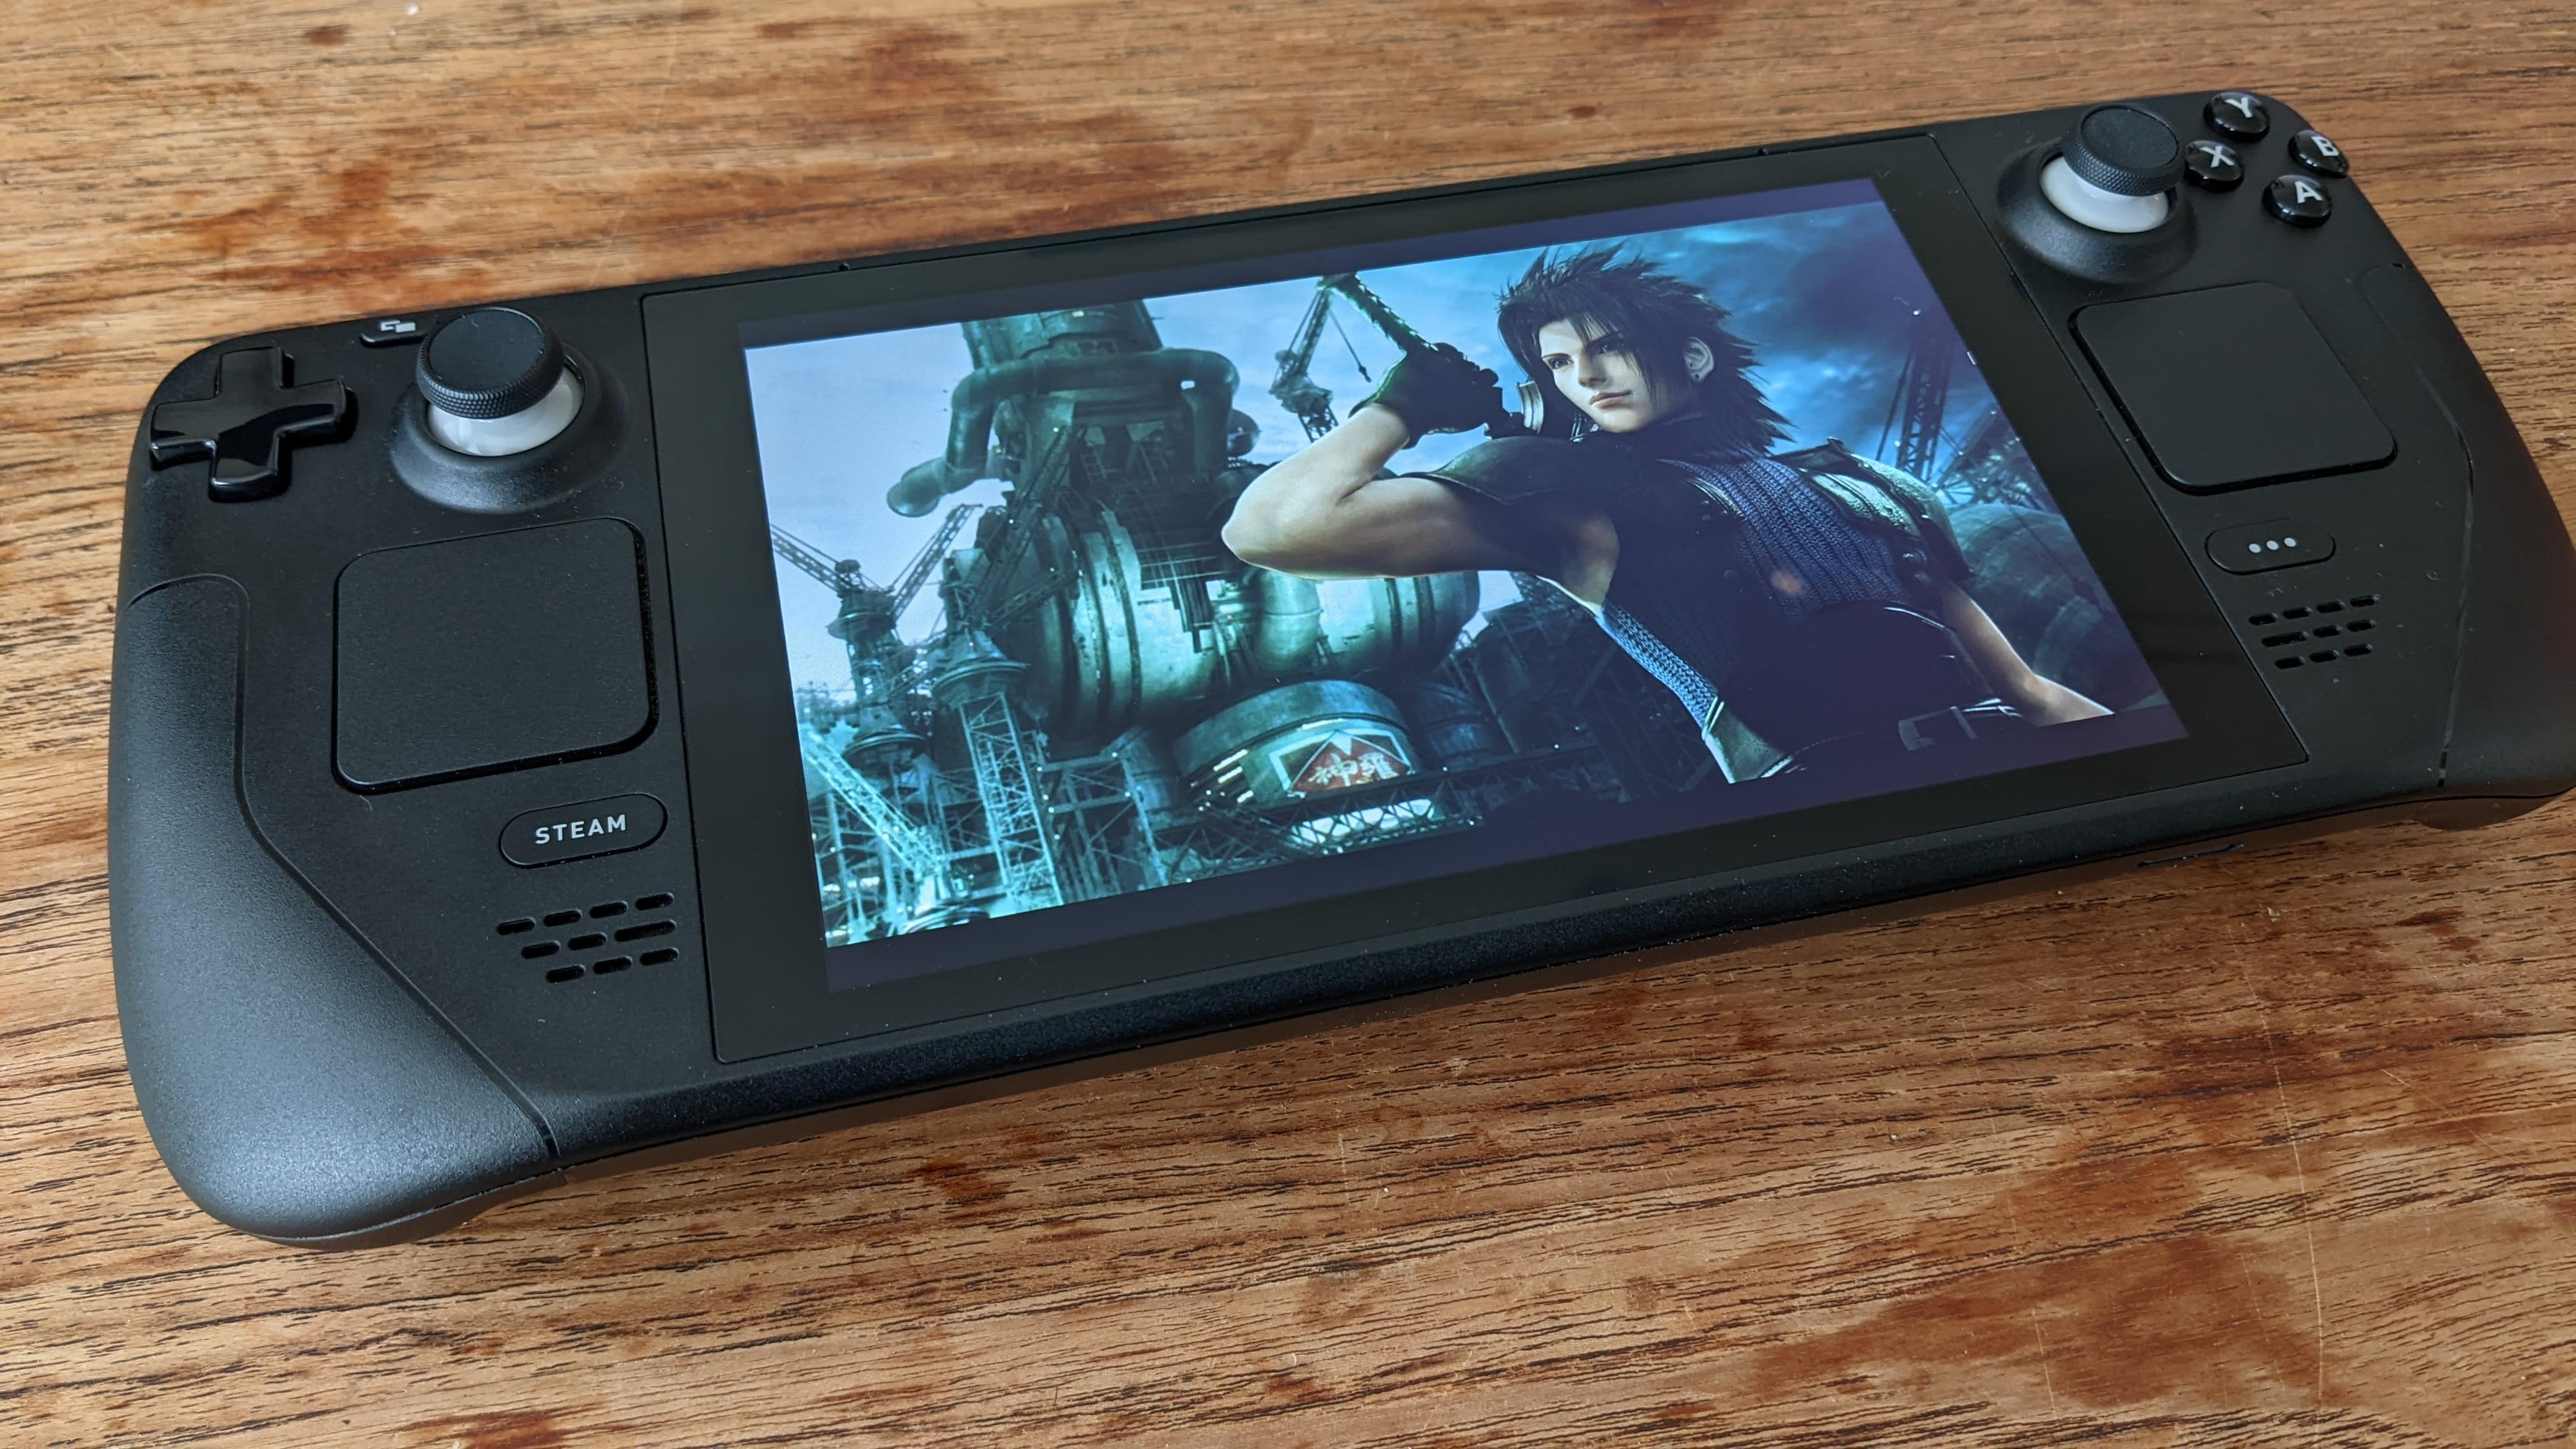 The best PS2 emulators for iOS - Android Authority